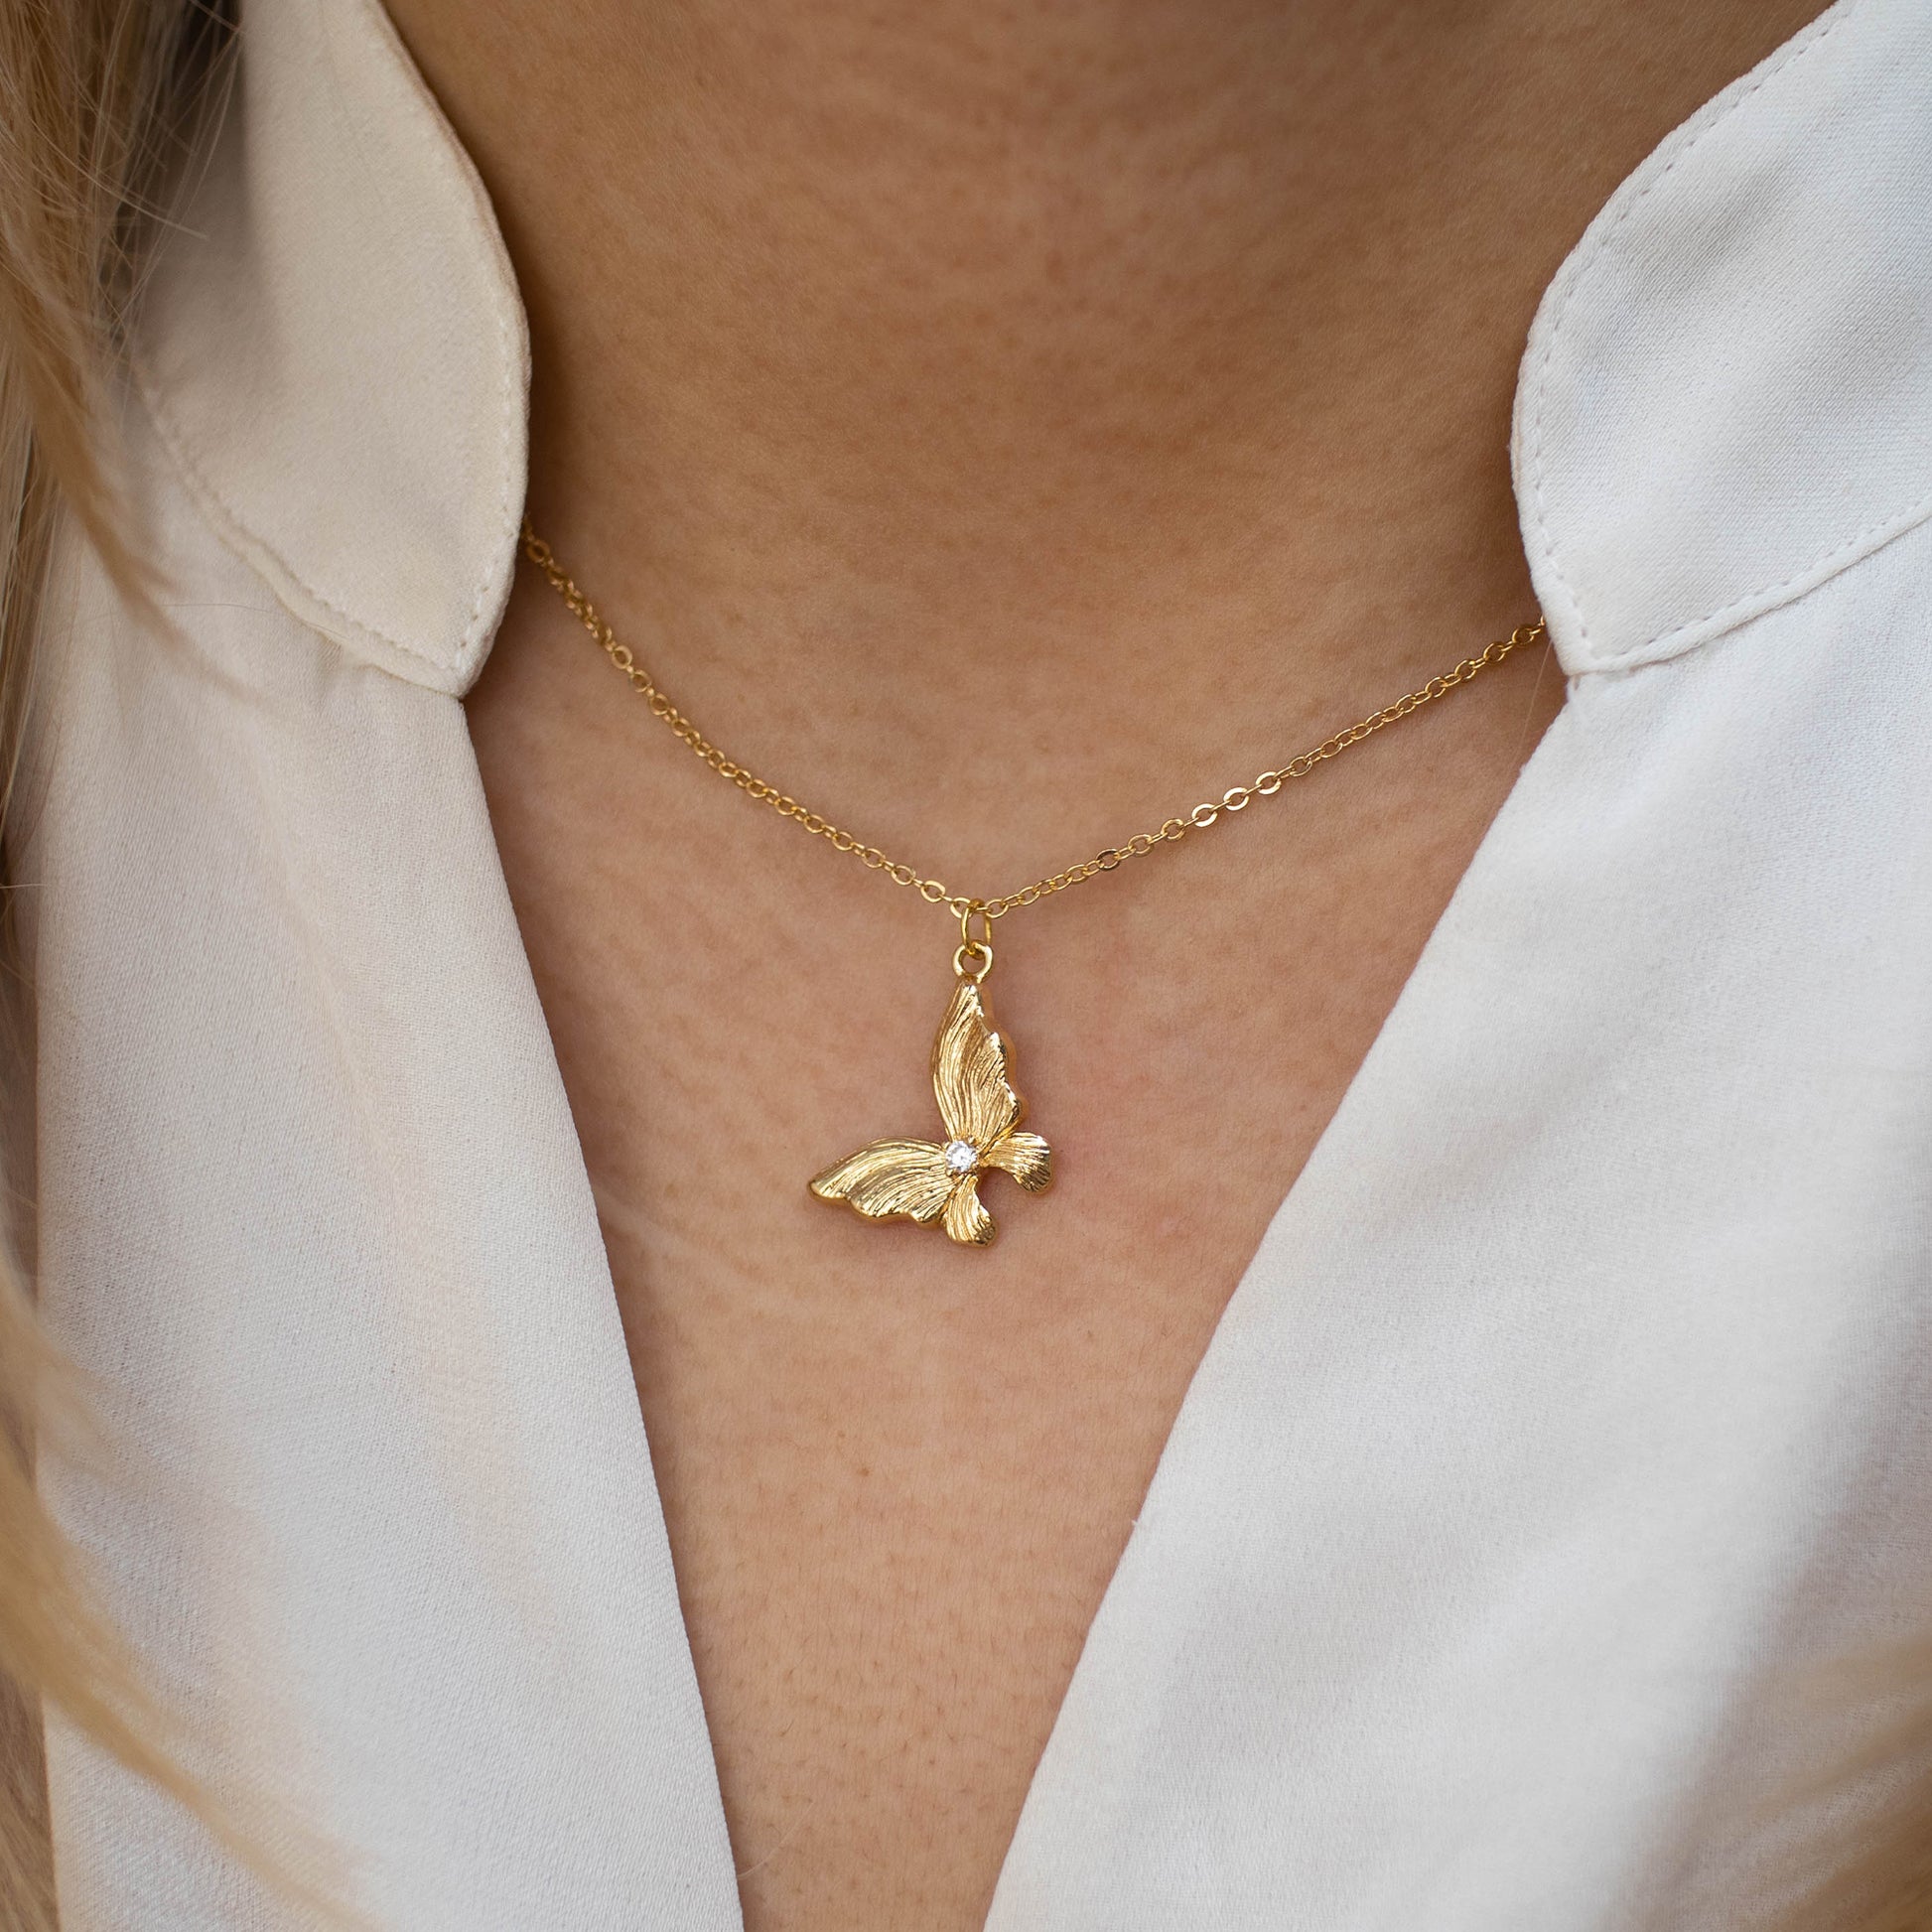 This photo features a thin chain necklace made of 14K gold-plated sterling silver, paired with Gold Butterfly Necklace